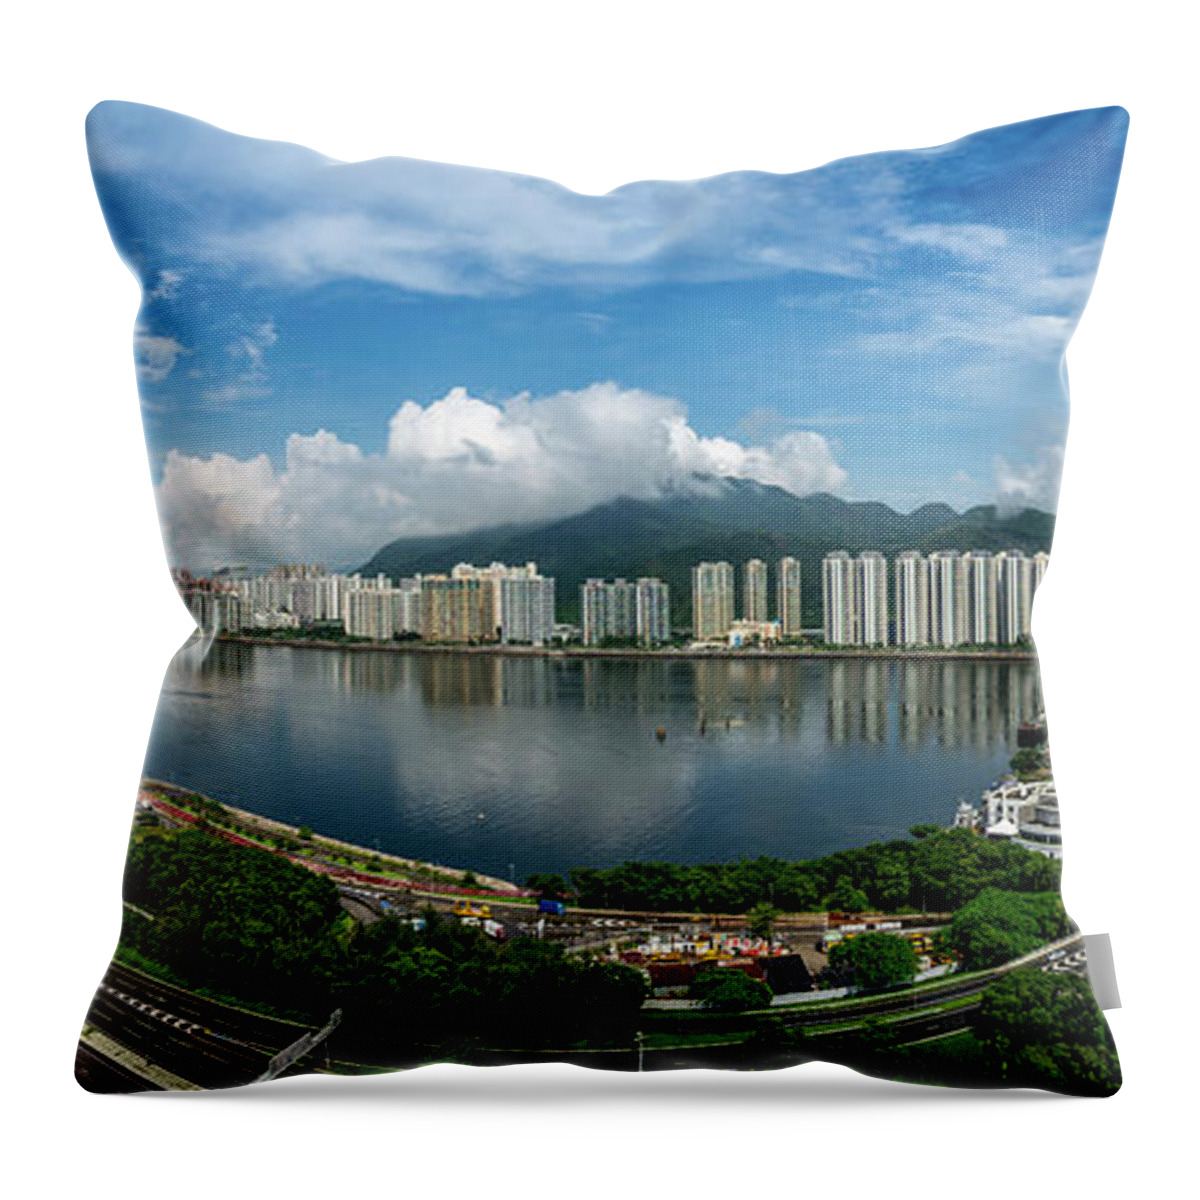 Tranquility Throw Pillow featuring the photograph Tolo Harbour Pano by Photographer - Rob Smith